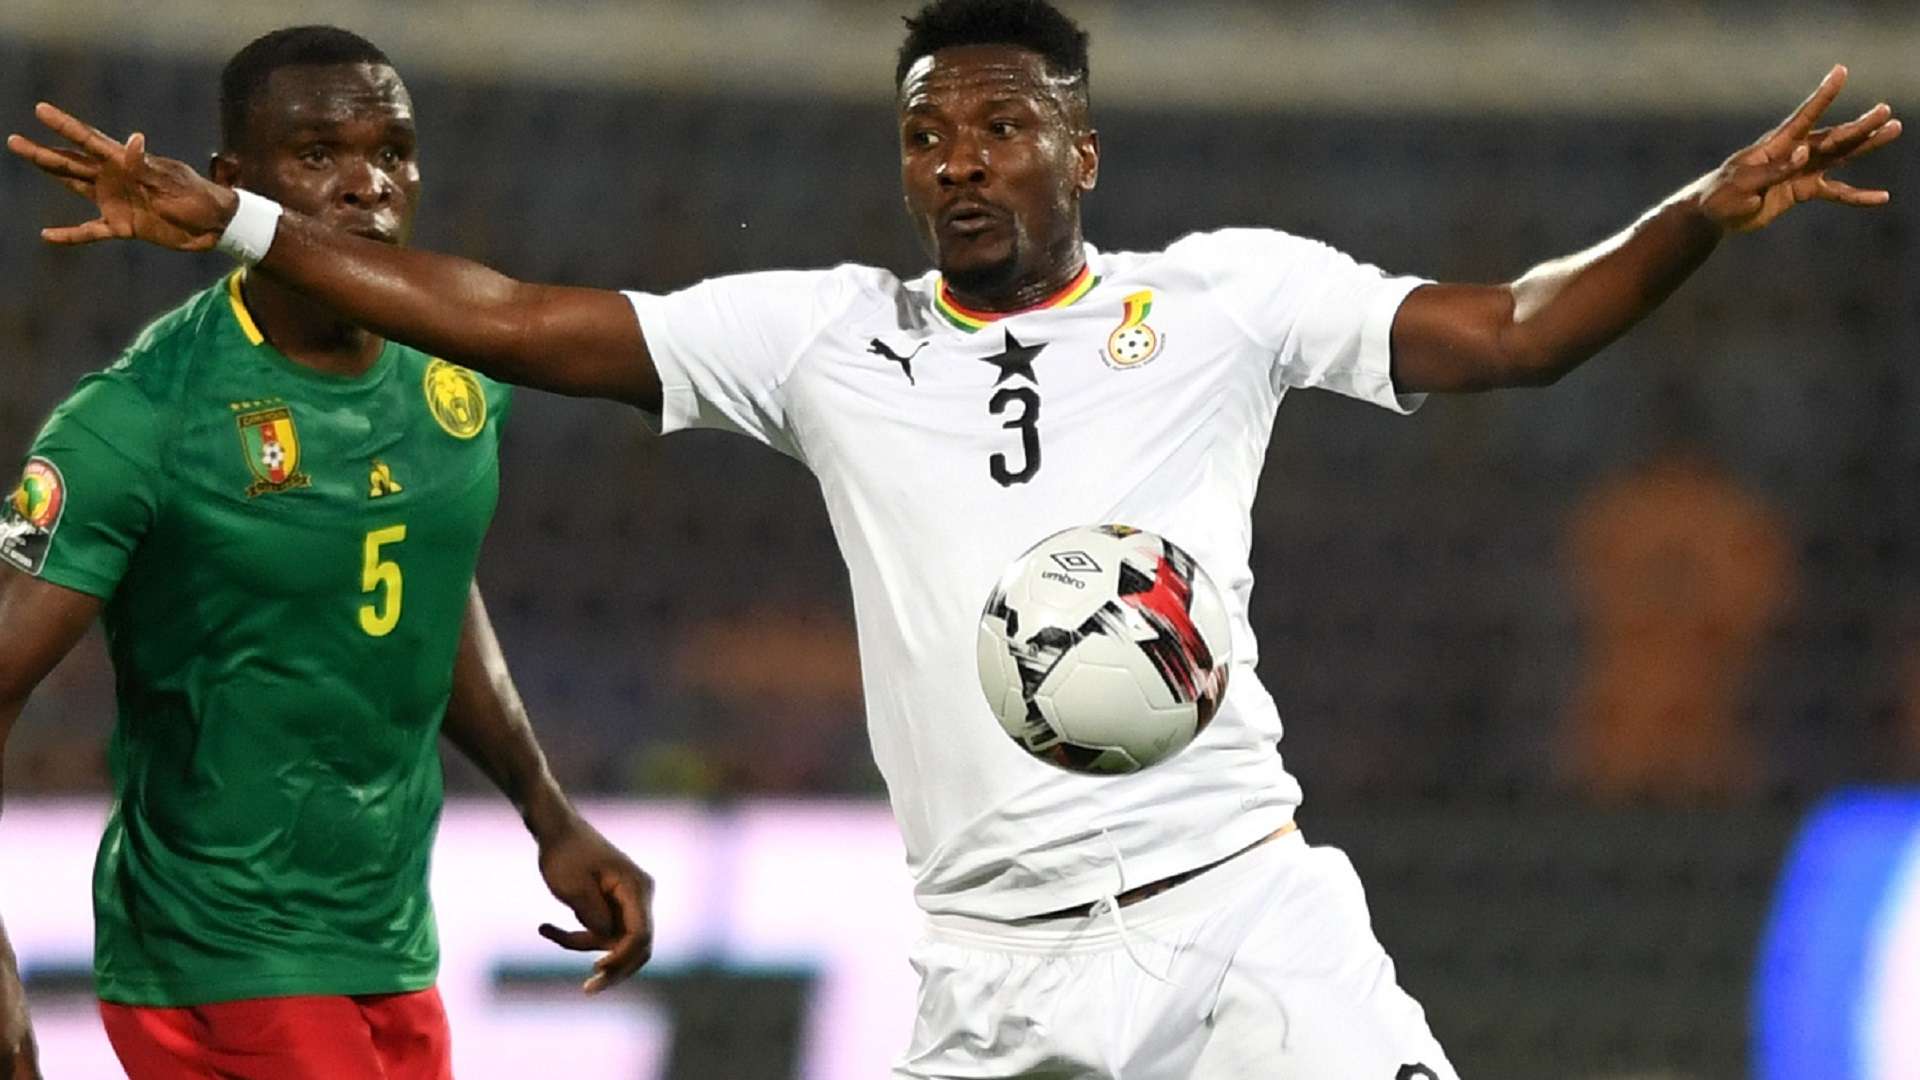 Ghana's forward Asamoah Gyan controls the ball during the 2019 Africa Cup of Nations